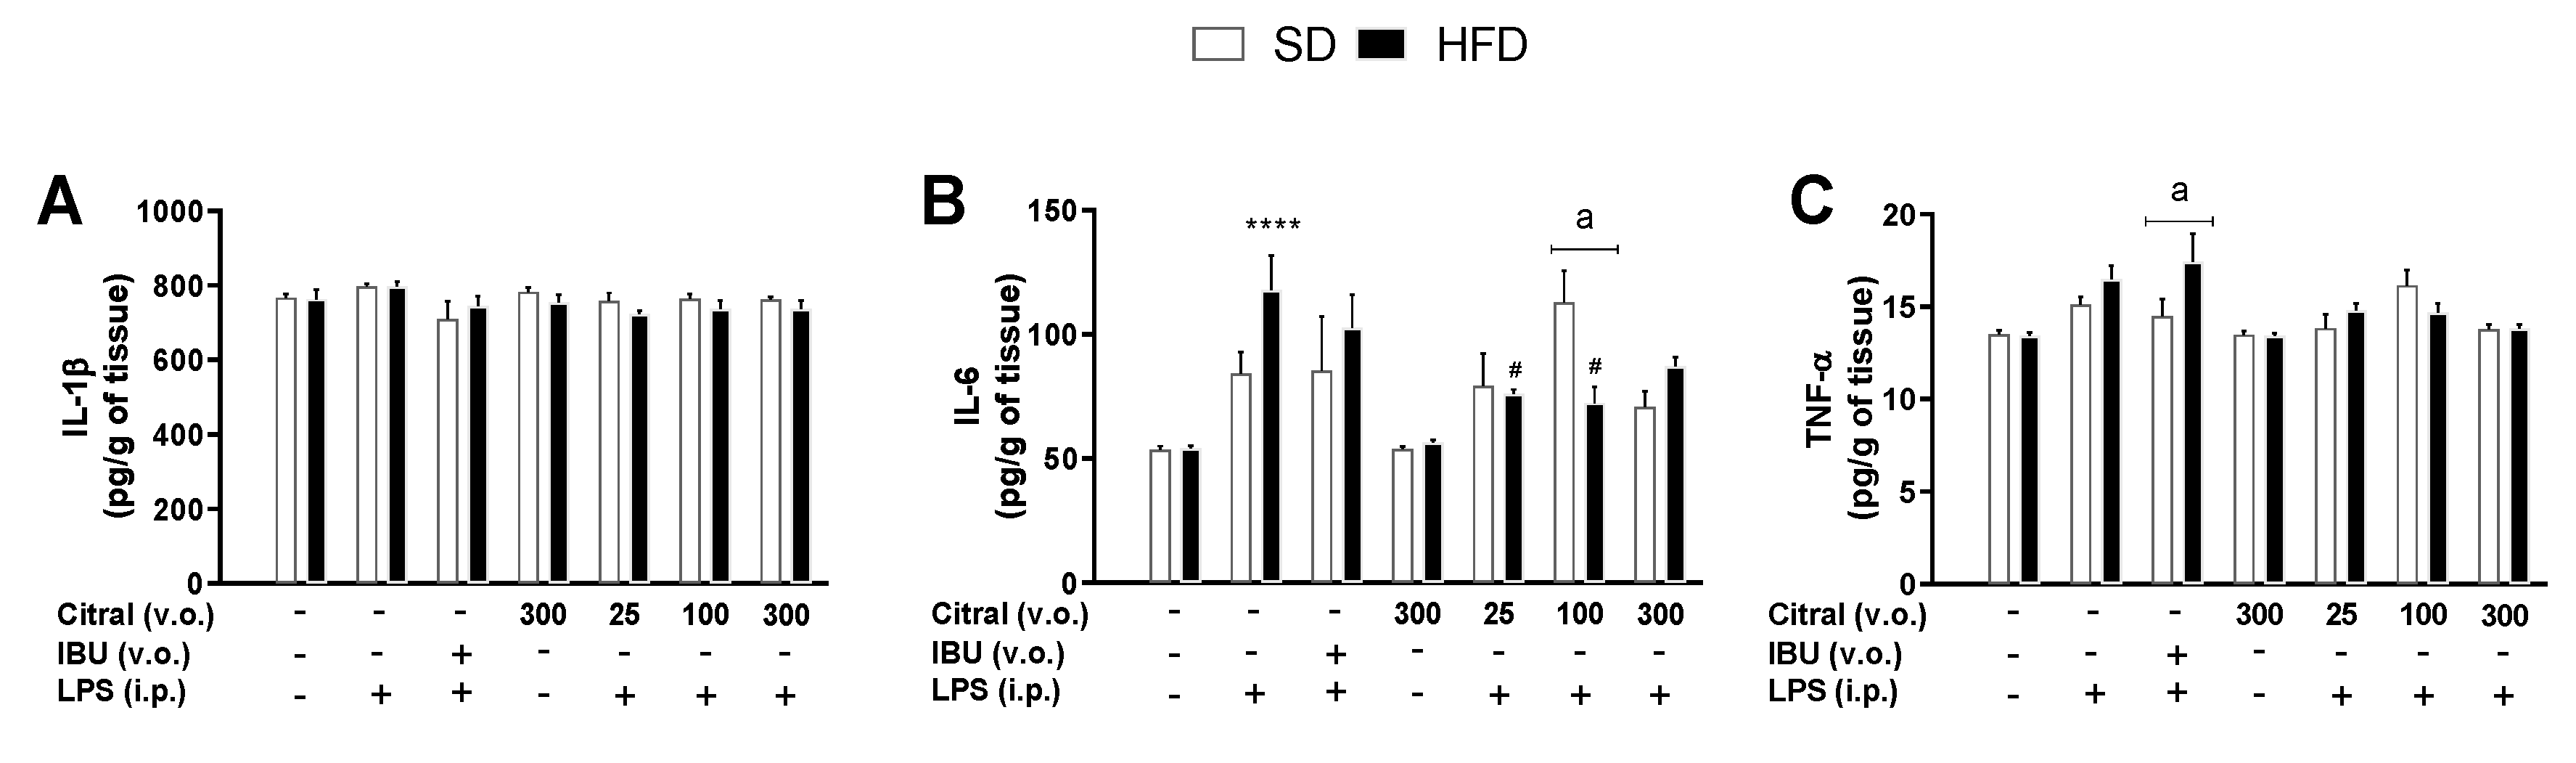 Biomolecules | Free Full-Text | Hypothermic Effect of Acute Citral  Treatment during LPS-induced Systemic Inflammation in Obese Mice: Reduction  of Serum TNF-α and Leptin Levels